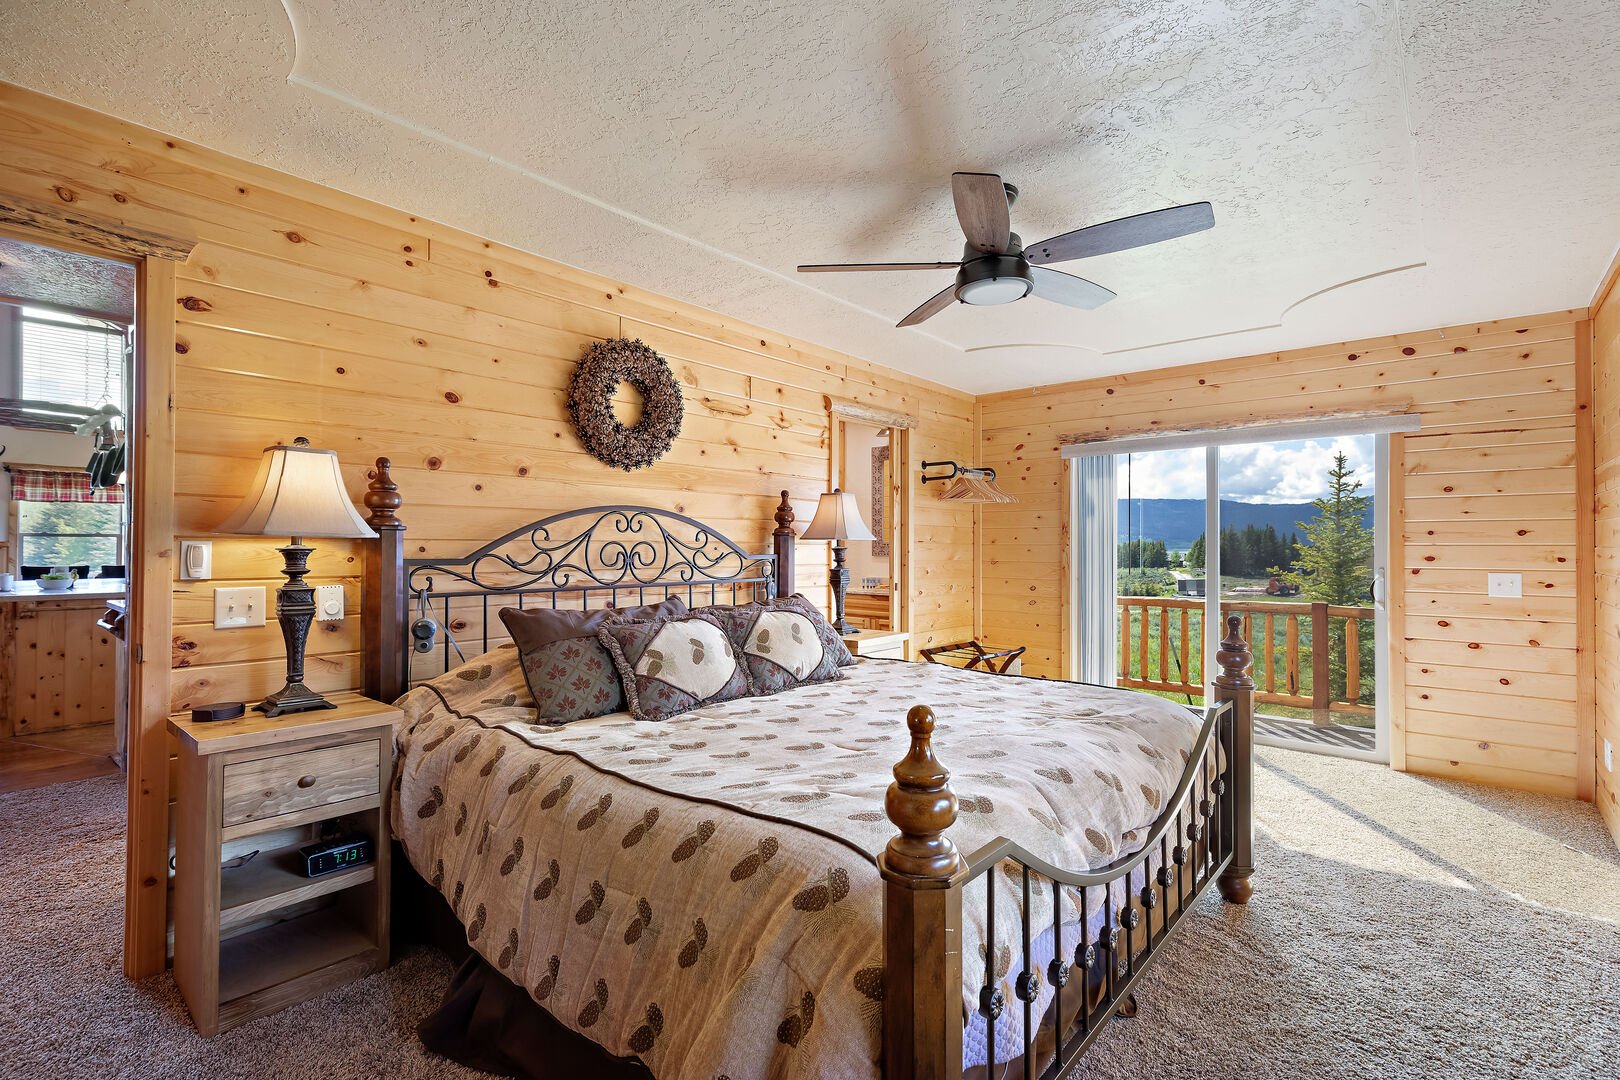 Henrys Hawk ~ main level master bedroom w/ queen bed, private ensuite bathroom, and private entrance to wraparound porch